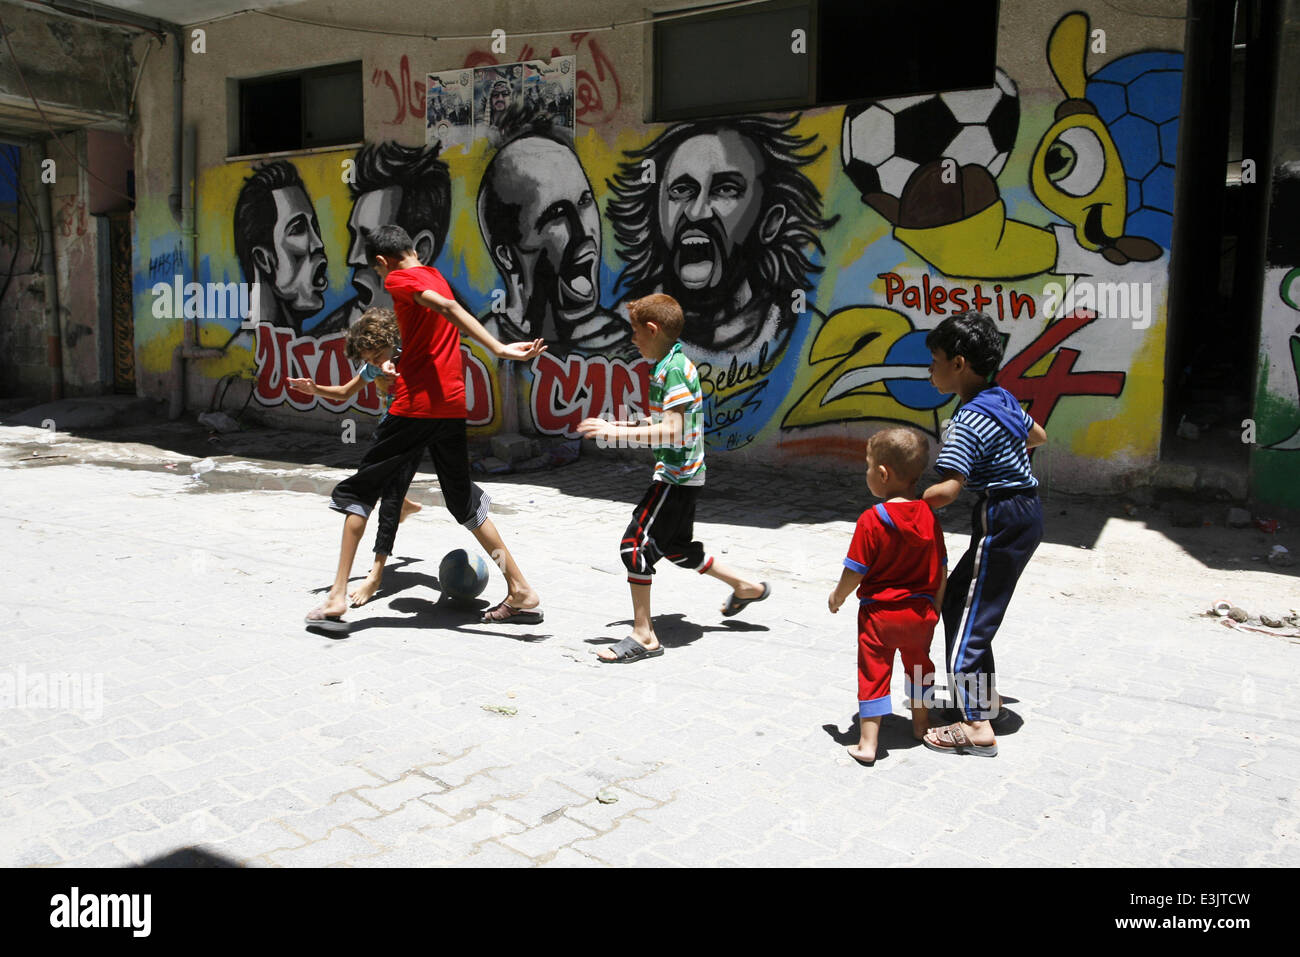 Gaza, Gaza Strip, Palestinian Territories. 23rd June, 2014. A Palestinian boys play a ball in front of graffiti wall murals depicting football players the participants at 2014 World Cup Brazil (LtoR) Portugal's Cristiano Ronaldo, Argentina's Lionel Messi, Netherlands' Arjen Robben and Italy's Andrea Pirlo, in the Khan Yunis refugee camp in the southern Gaza Strip. on June 23, 2014. © Abed Rahim Khatib/NurPhoto/ZUMAPRESS.com/Alamy Live News Stock Photo